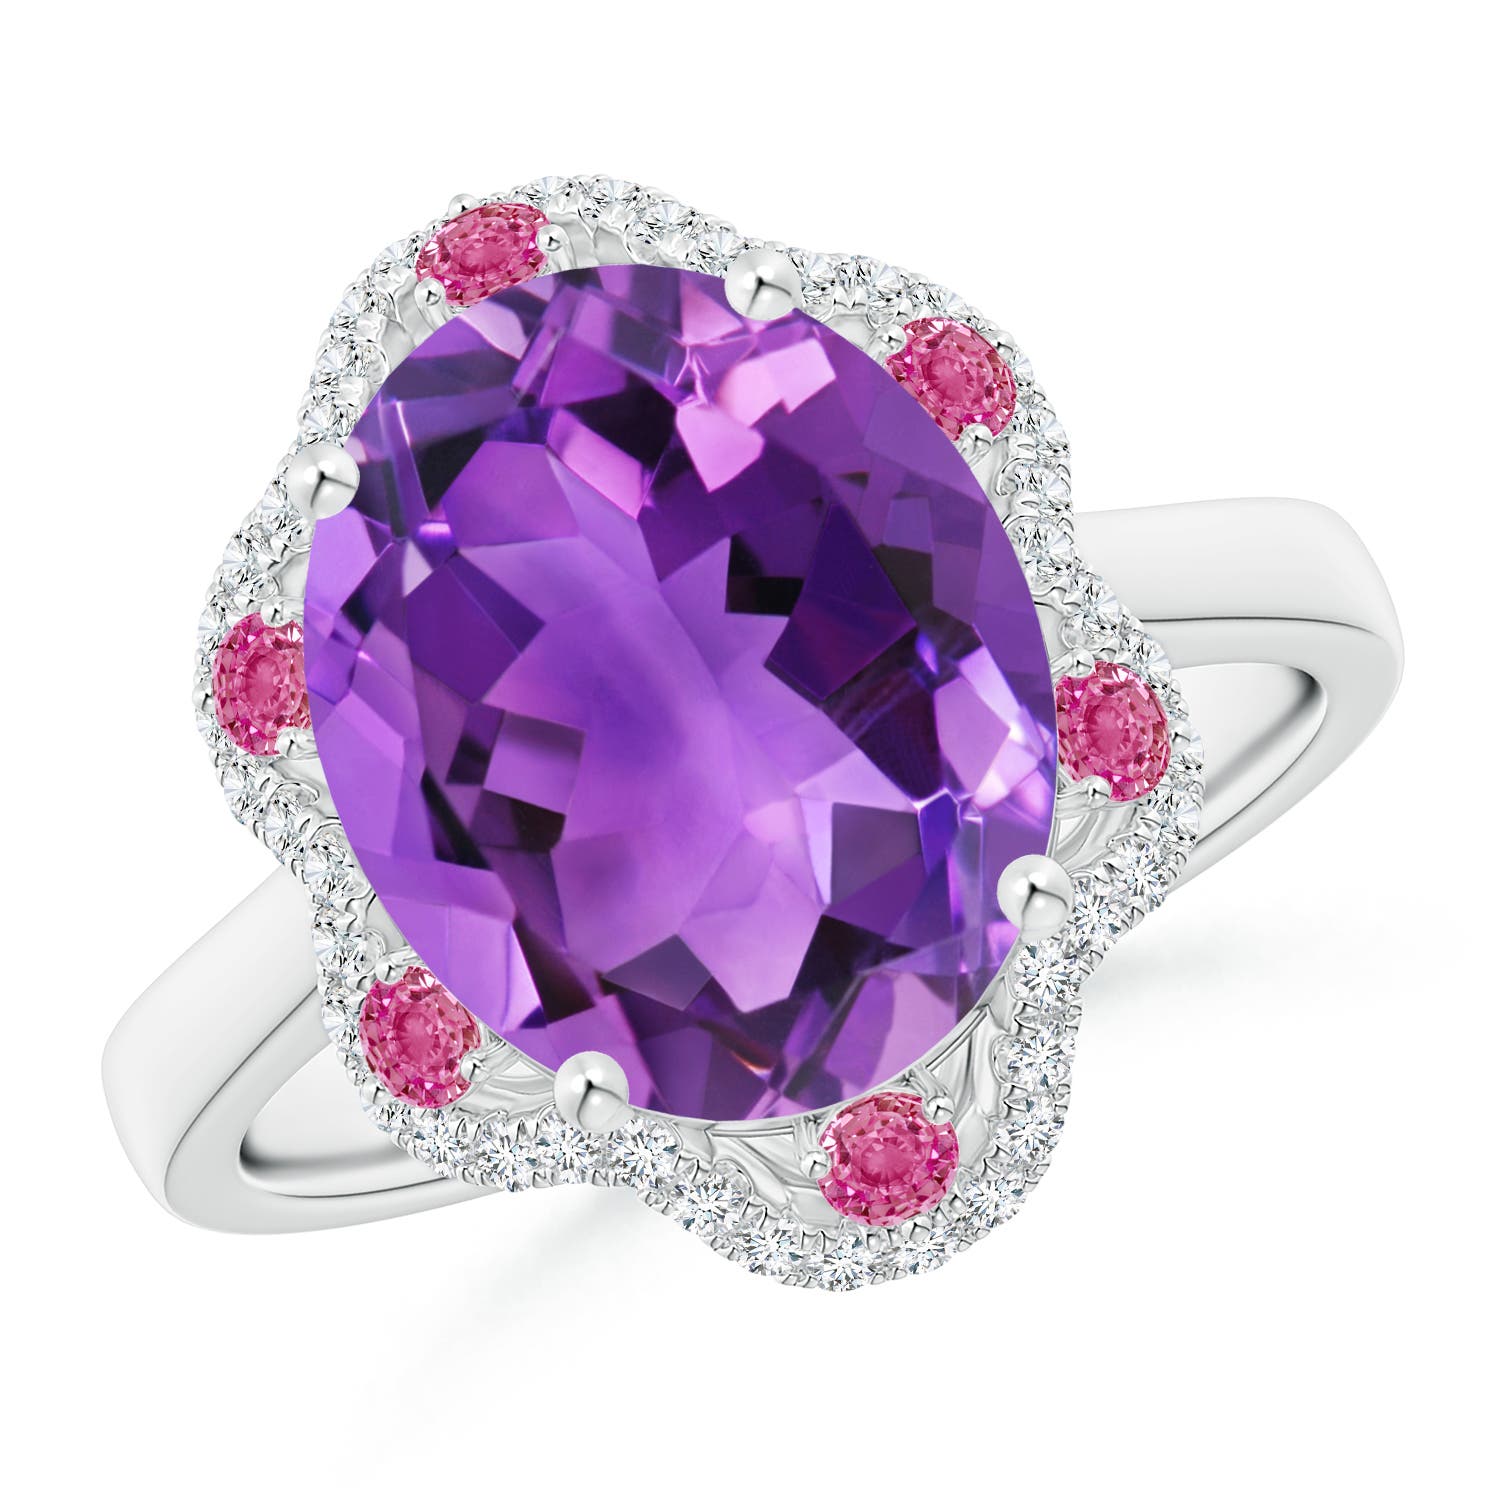 AAA - Amethyst / 4.76 CT / 14 KT White Gold